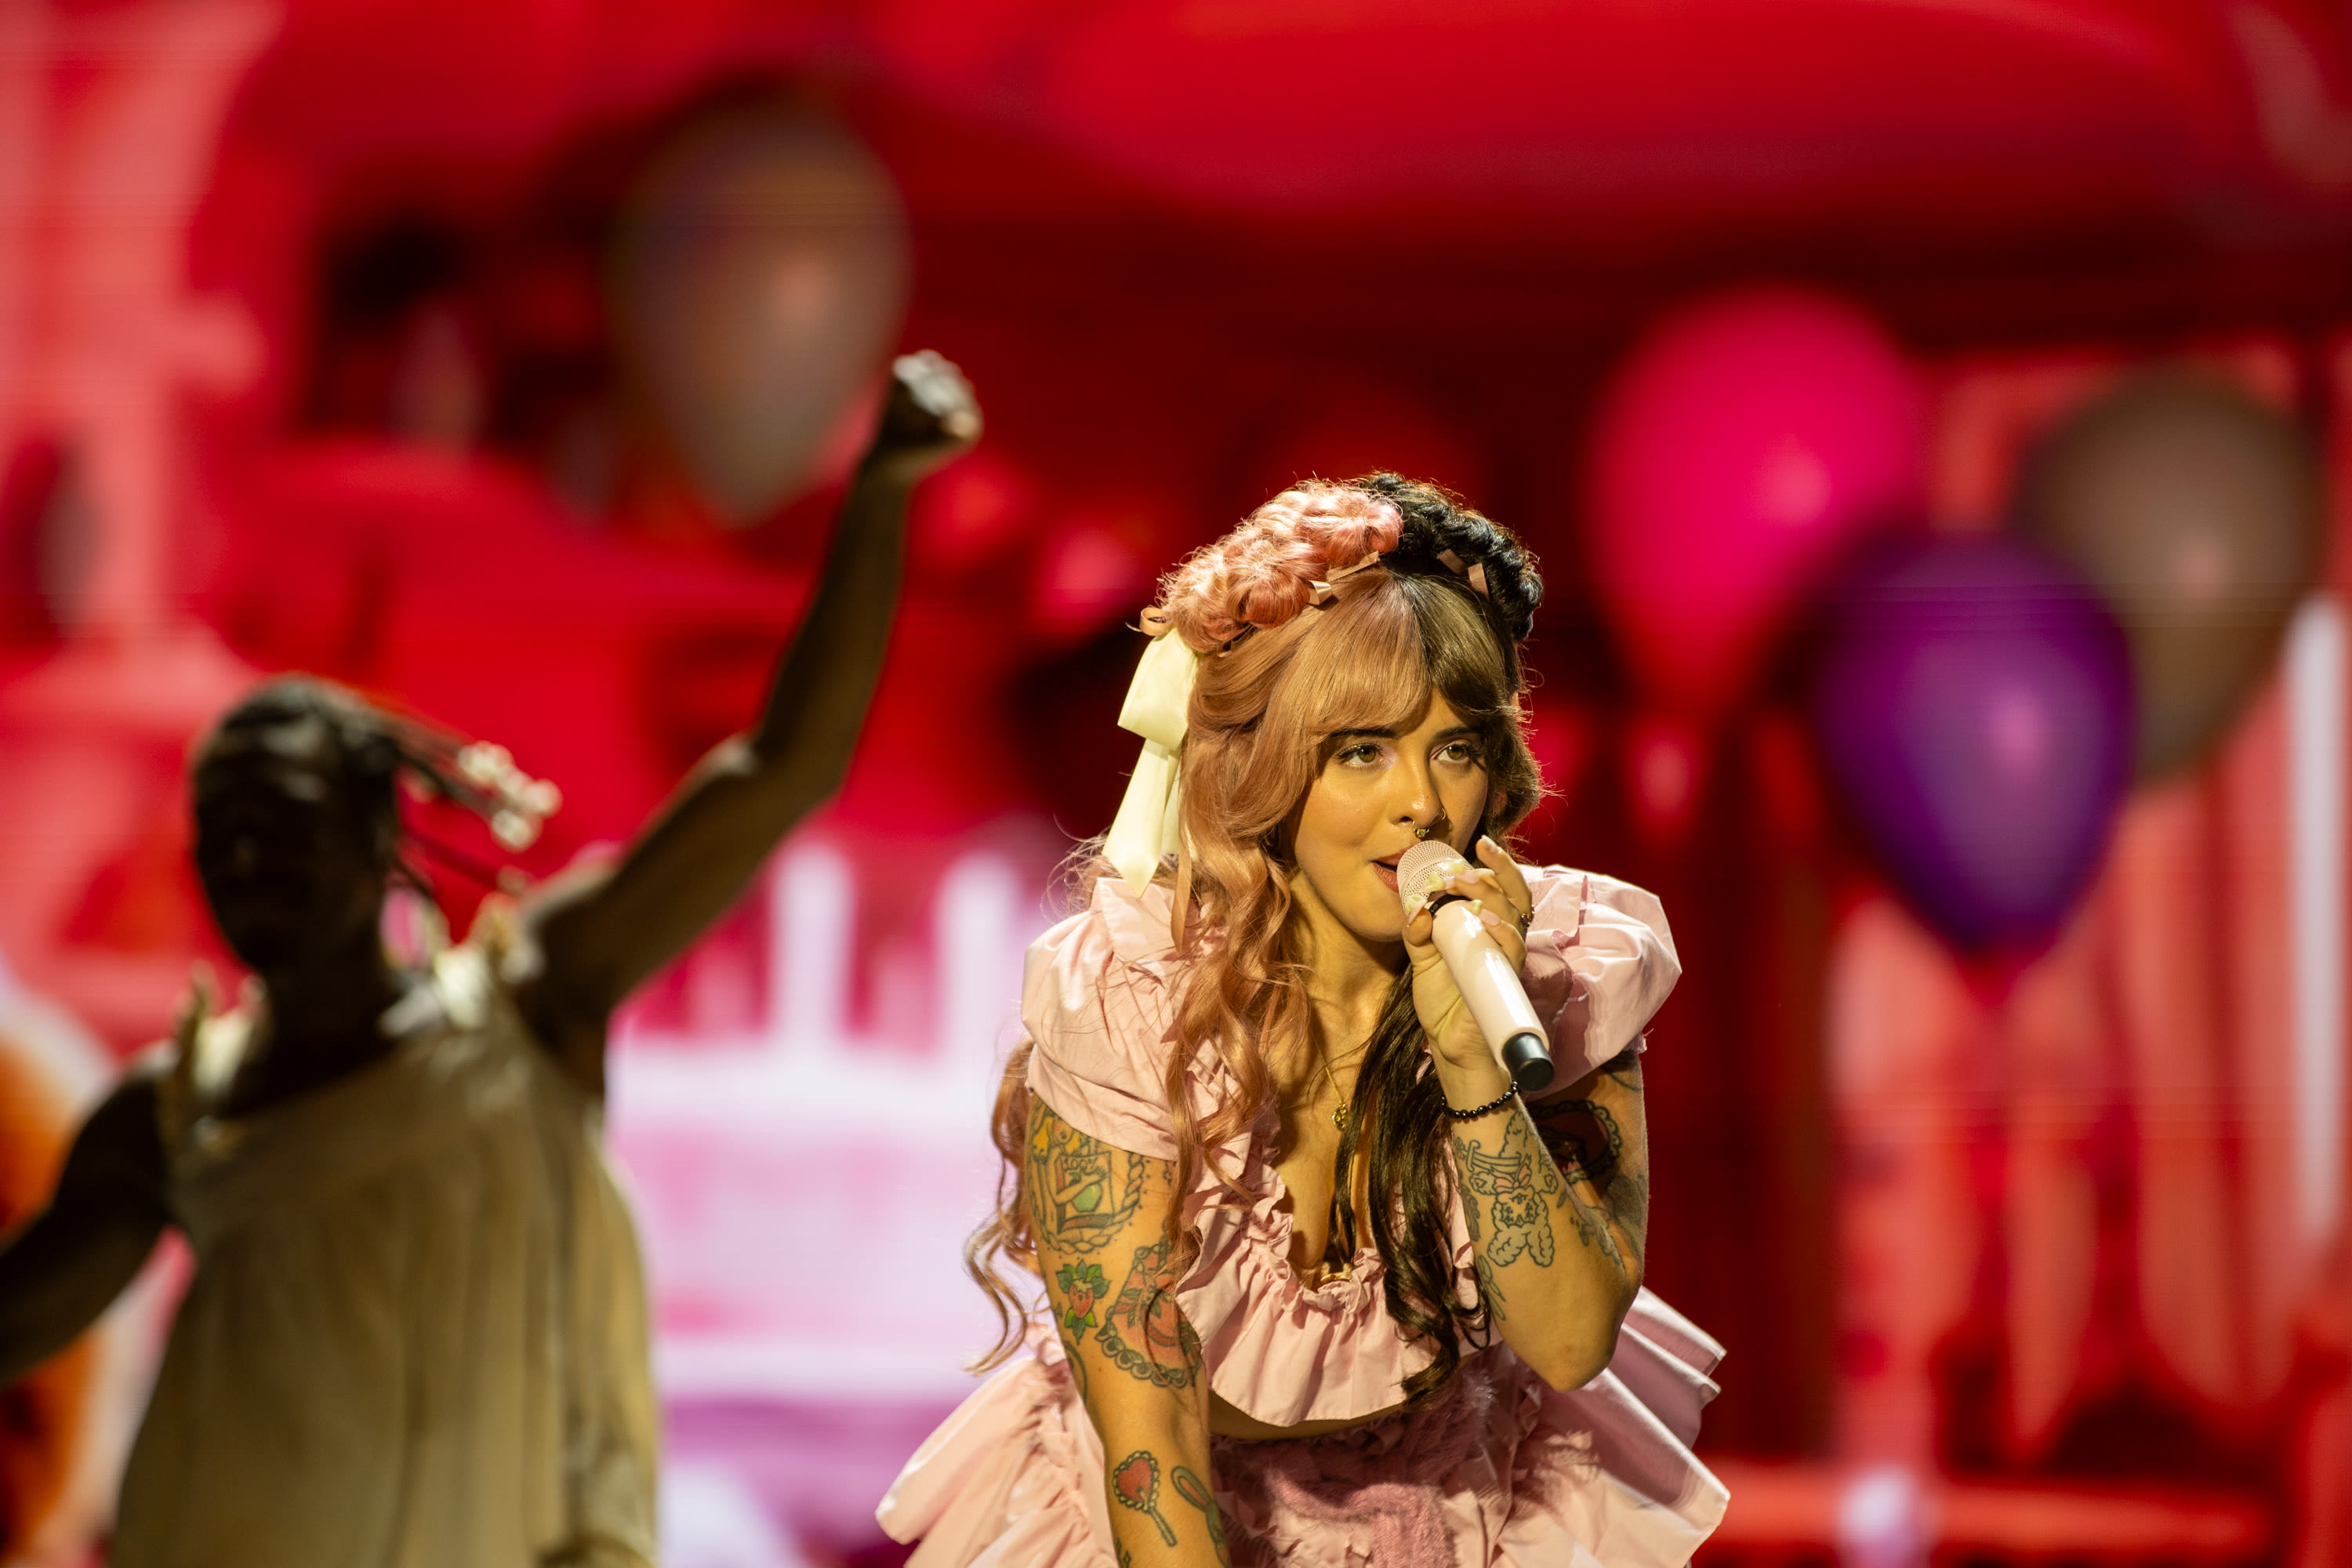 Melanie Martinez's gentle voice at center of a theatrical set bursting with creativity: Lollapalooza review